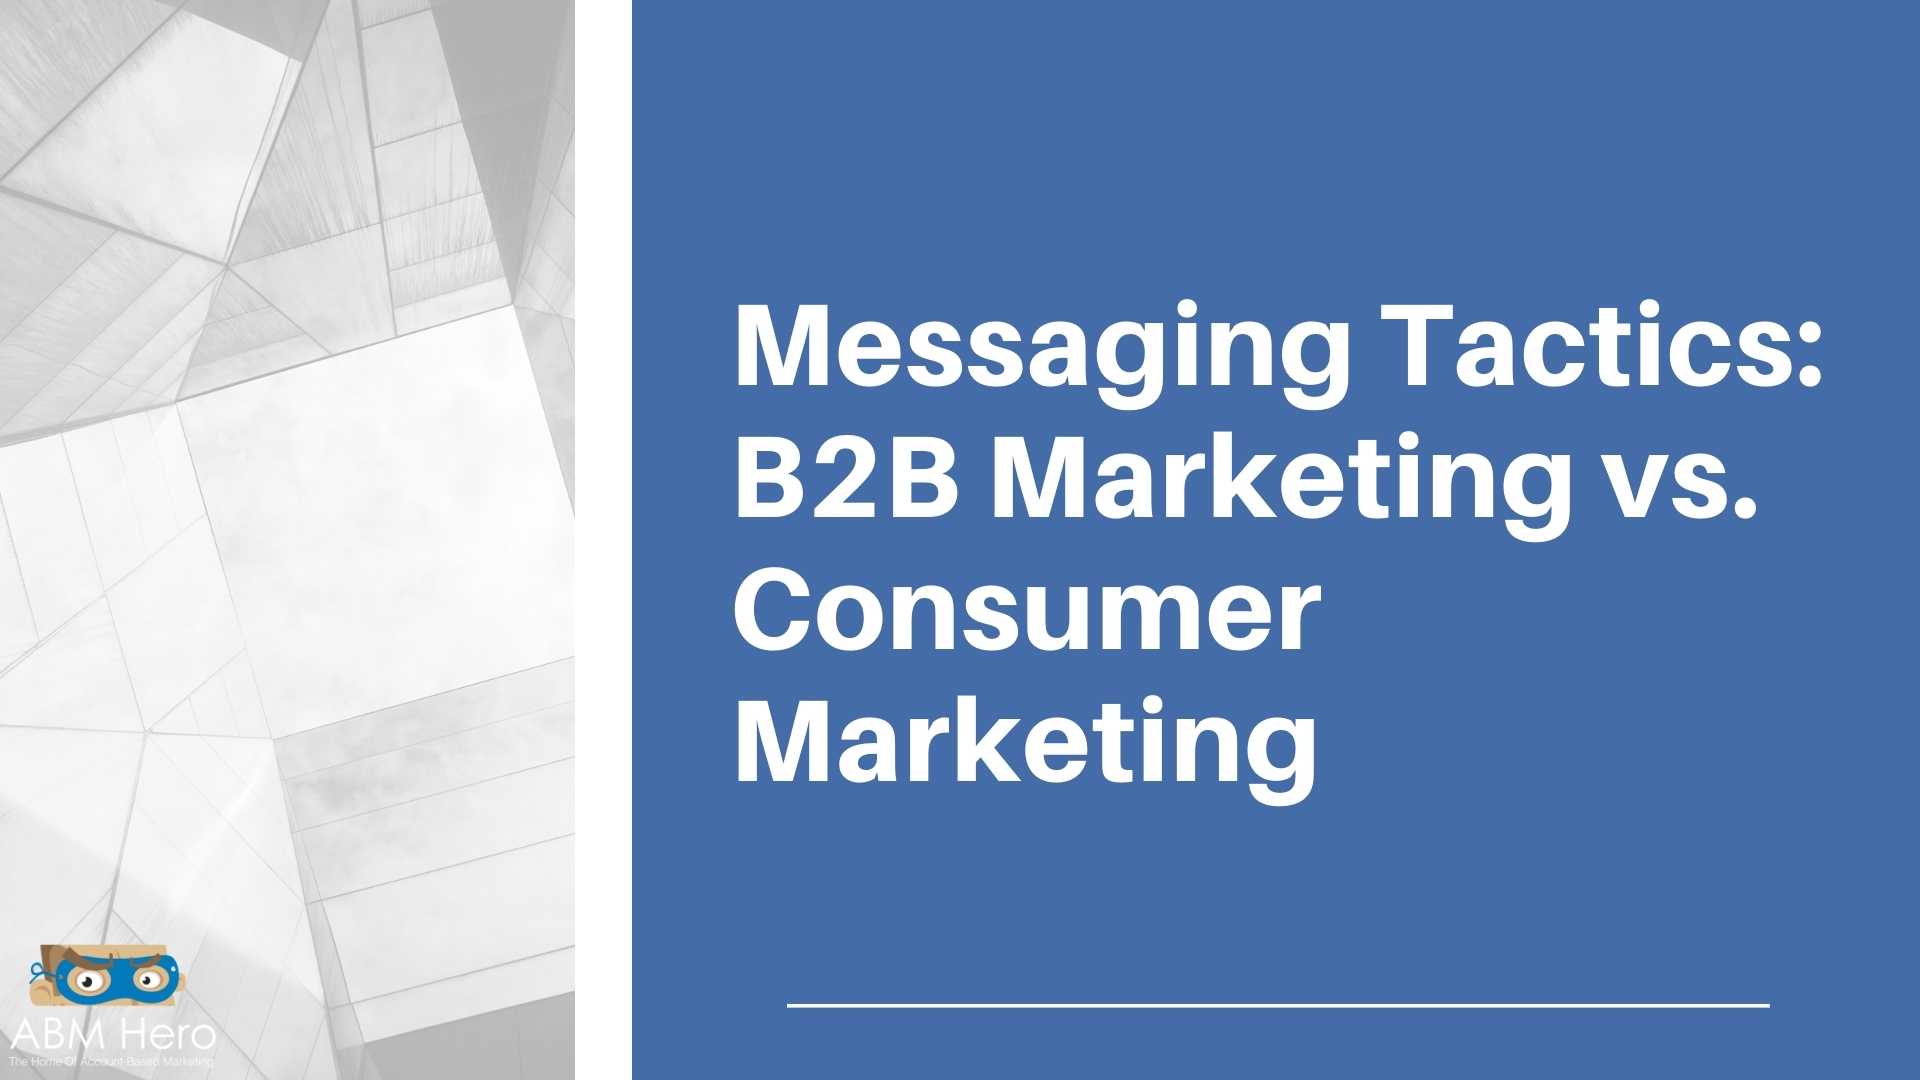 You are currently viewing Messaging Tactics: B2B Marketing vs. Consumer Marketing